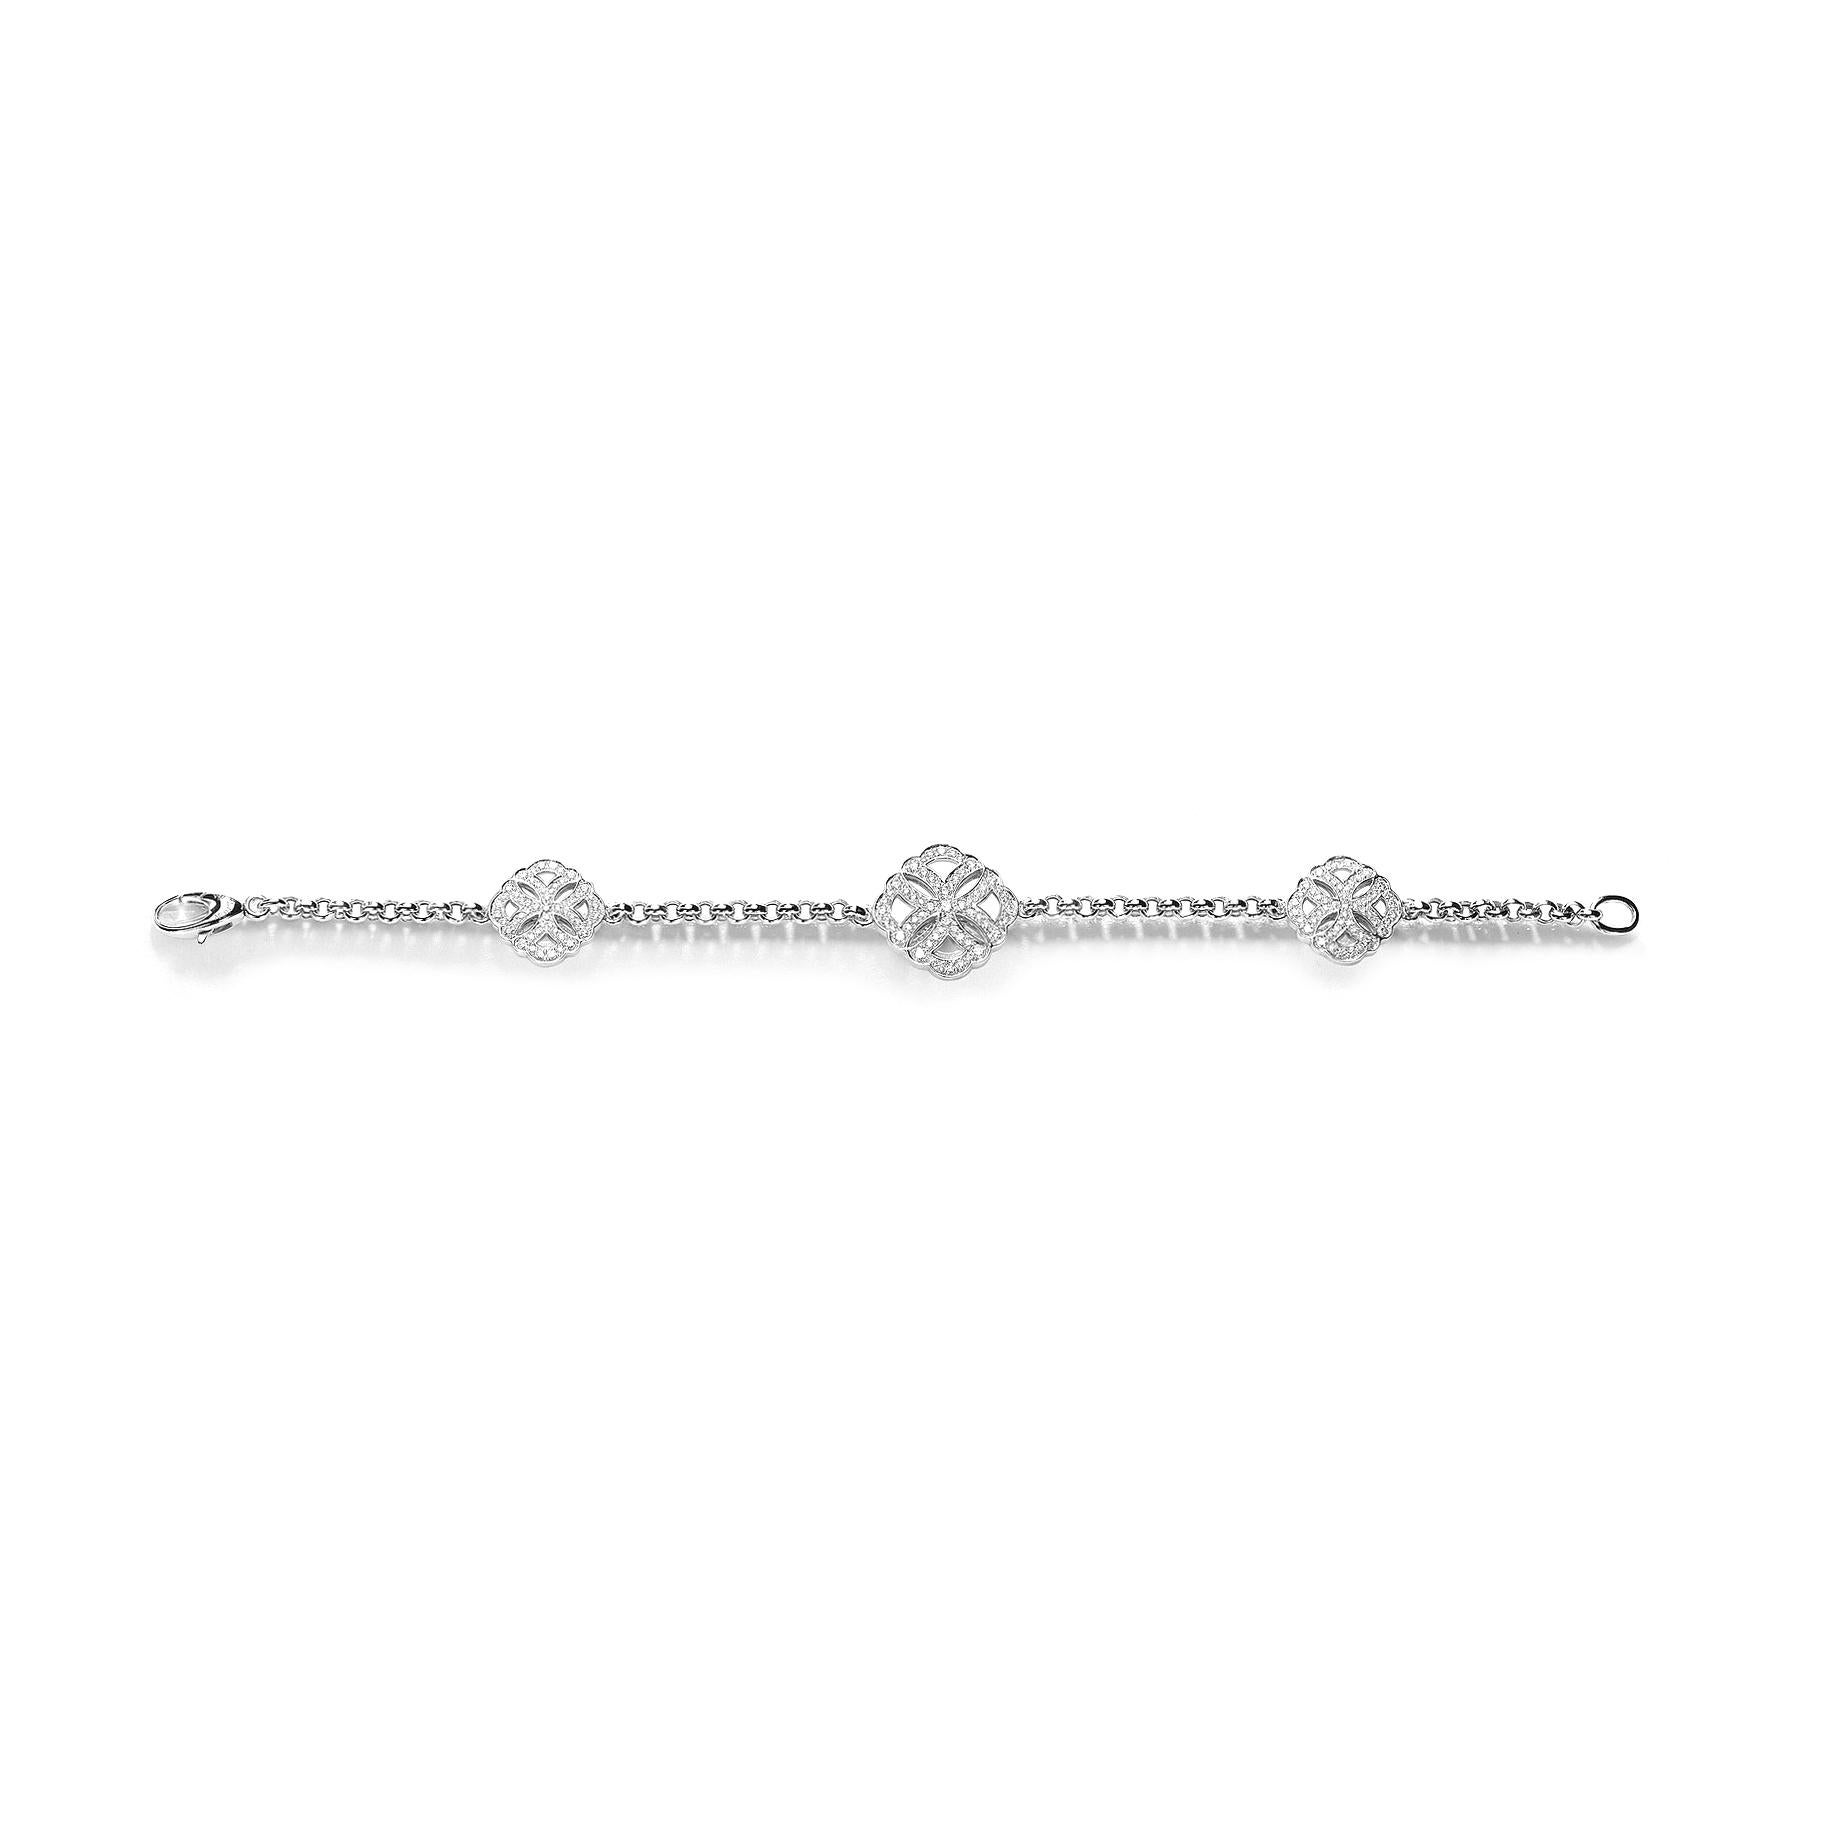 Bracelet in 18kt white gold set with 163 diamonds 1.01 cts